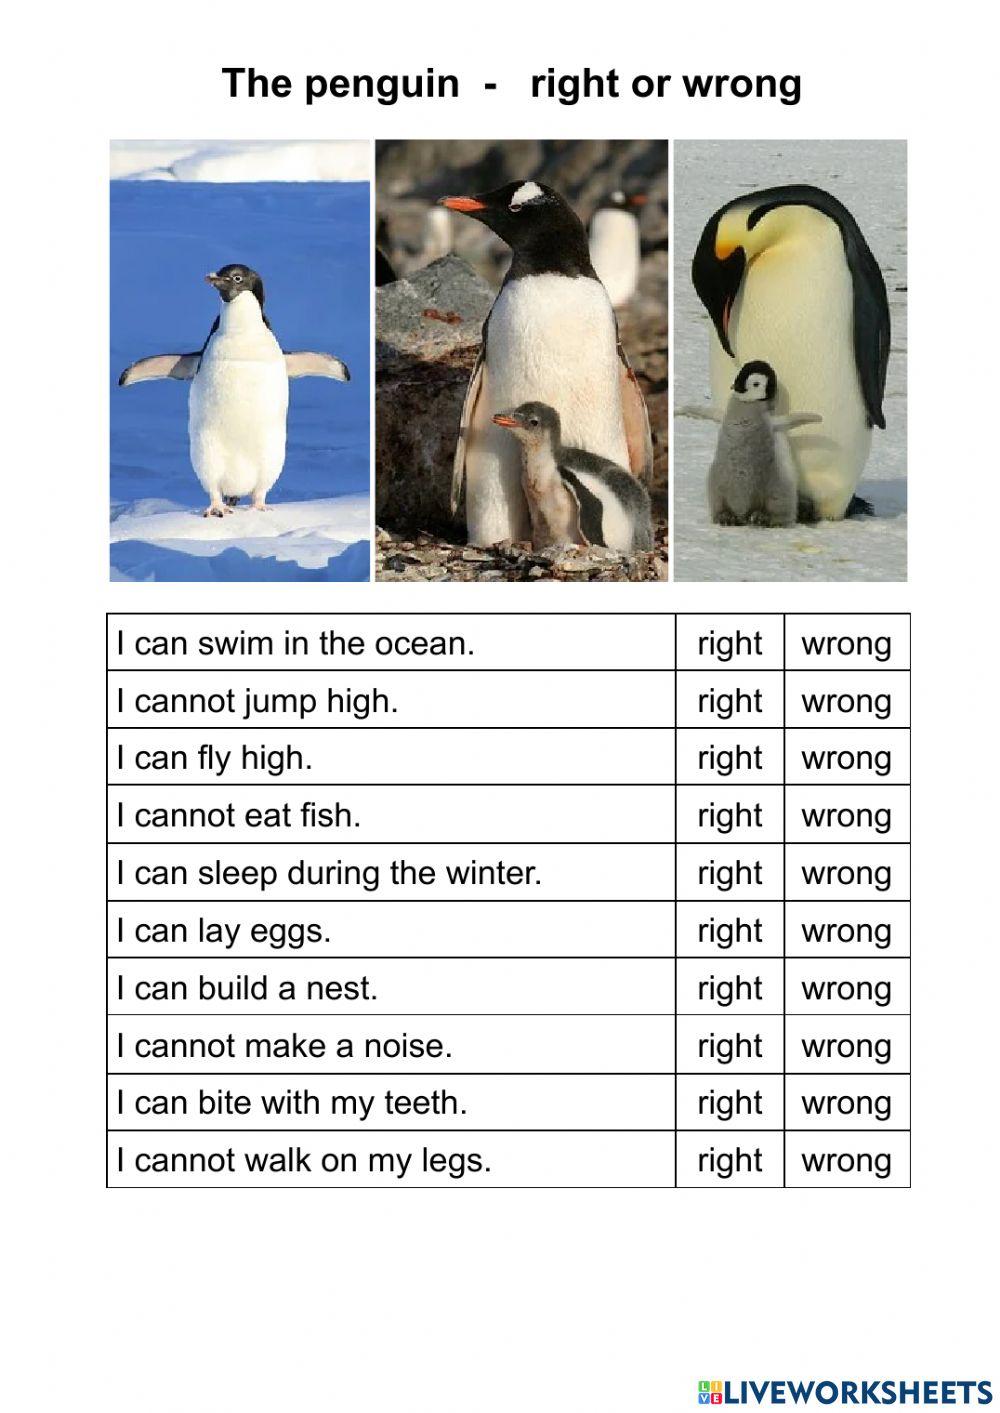 The penguin - right or wrong